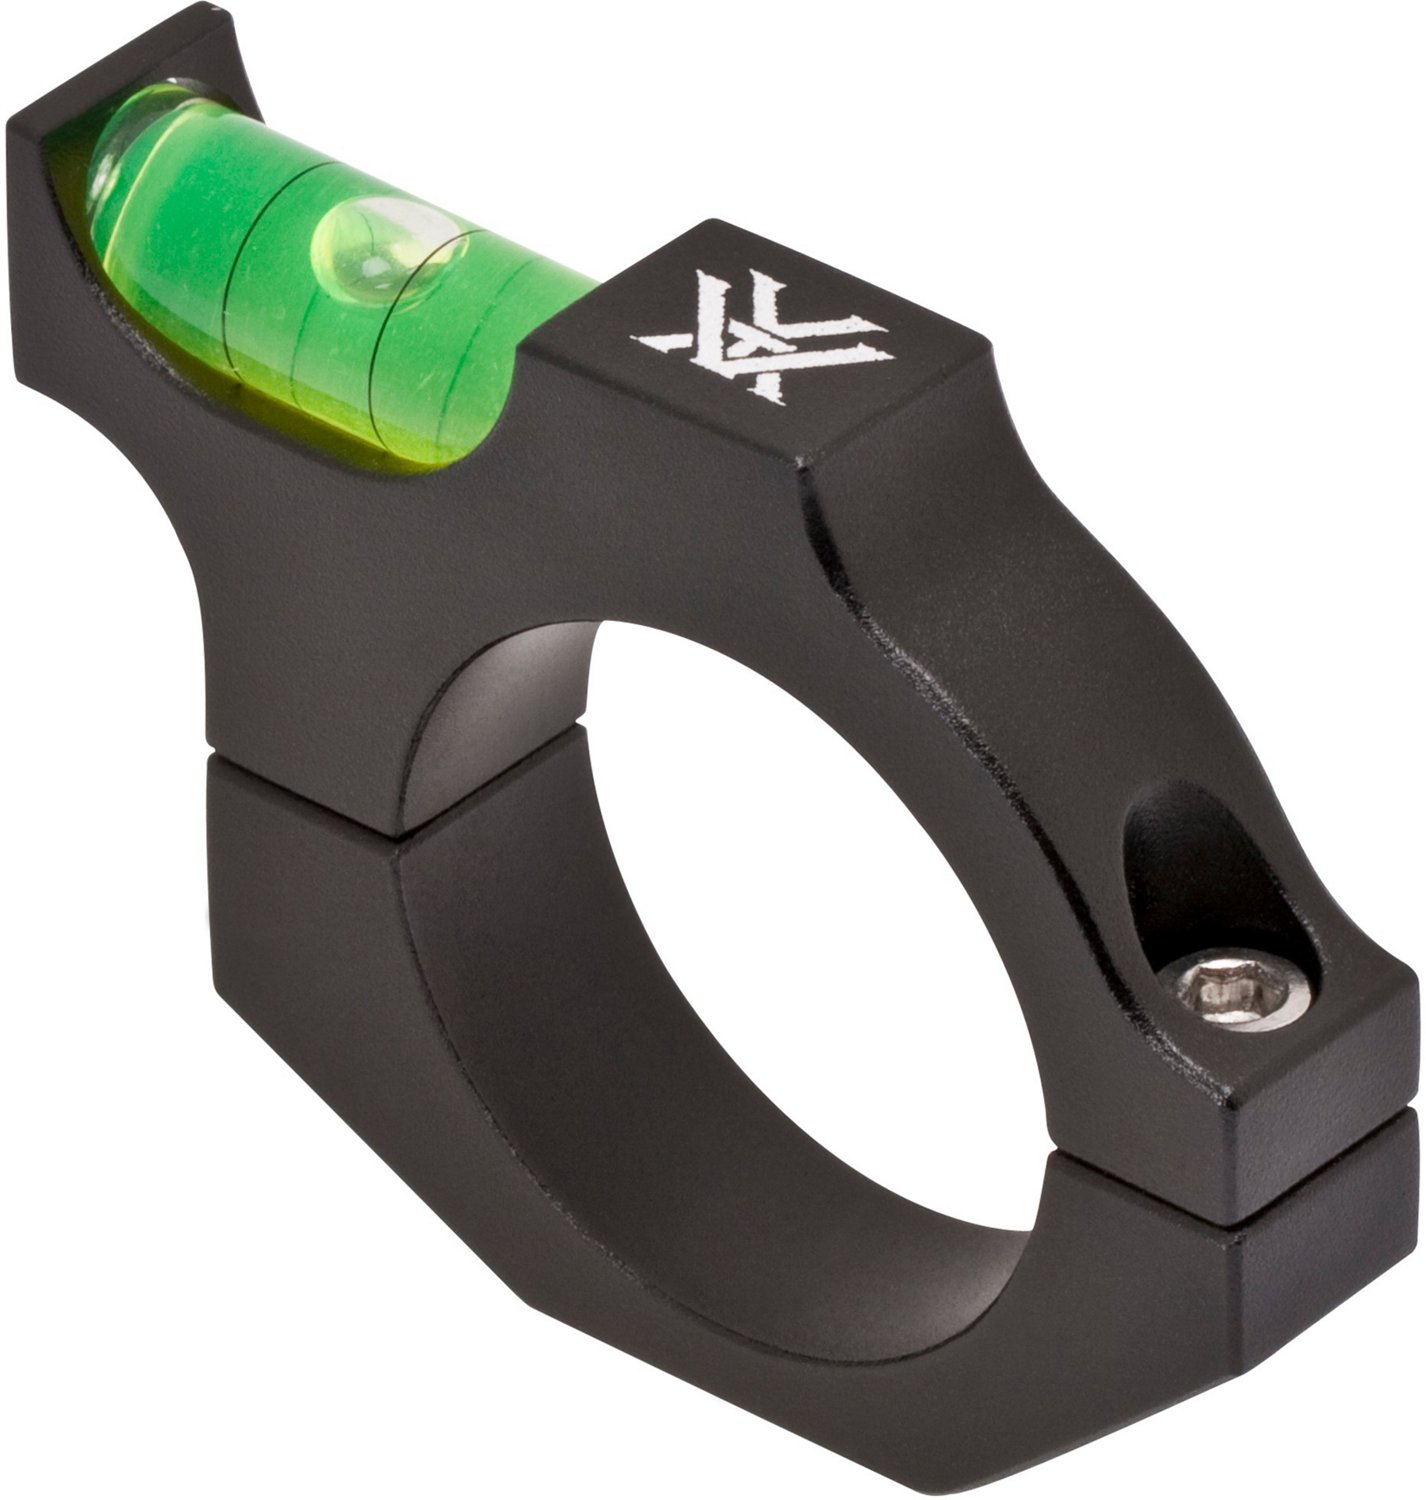 Vortex 30 mm Riflescope Bubble Level | Free Shipping at Academy